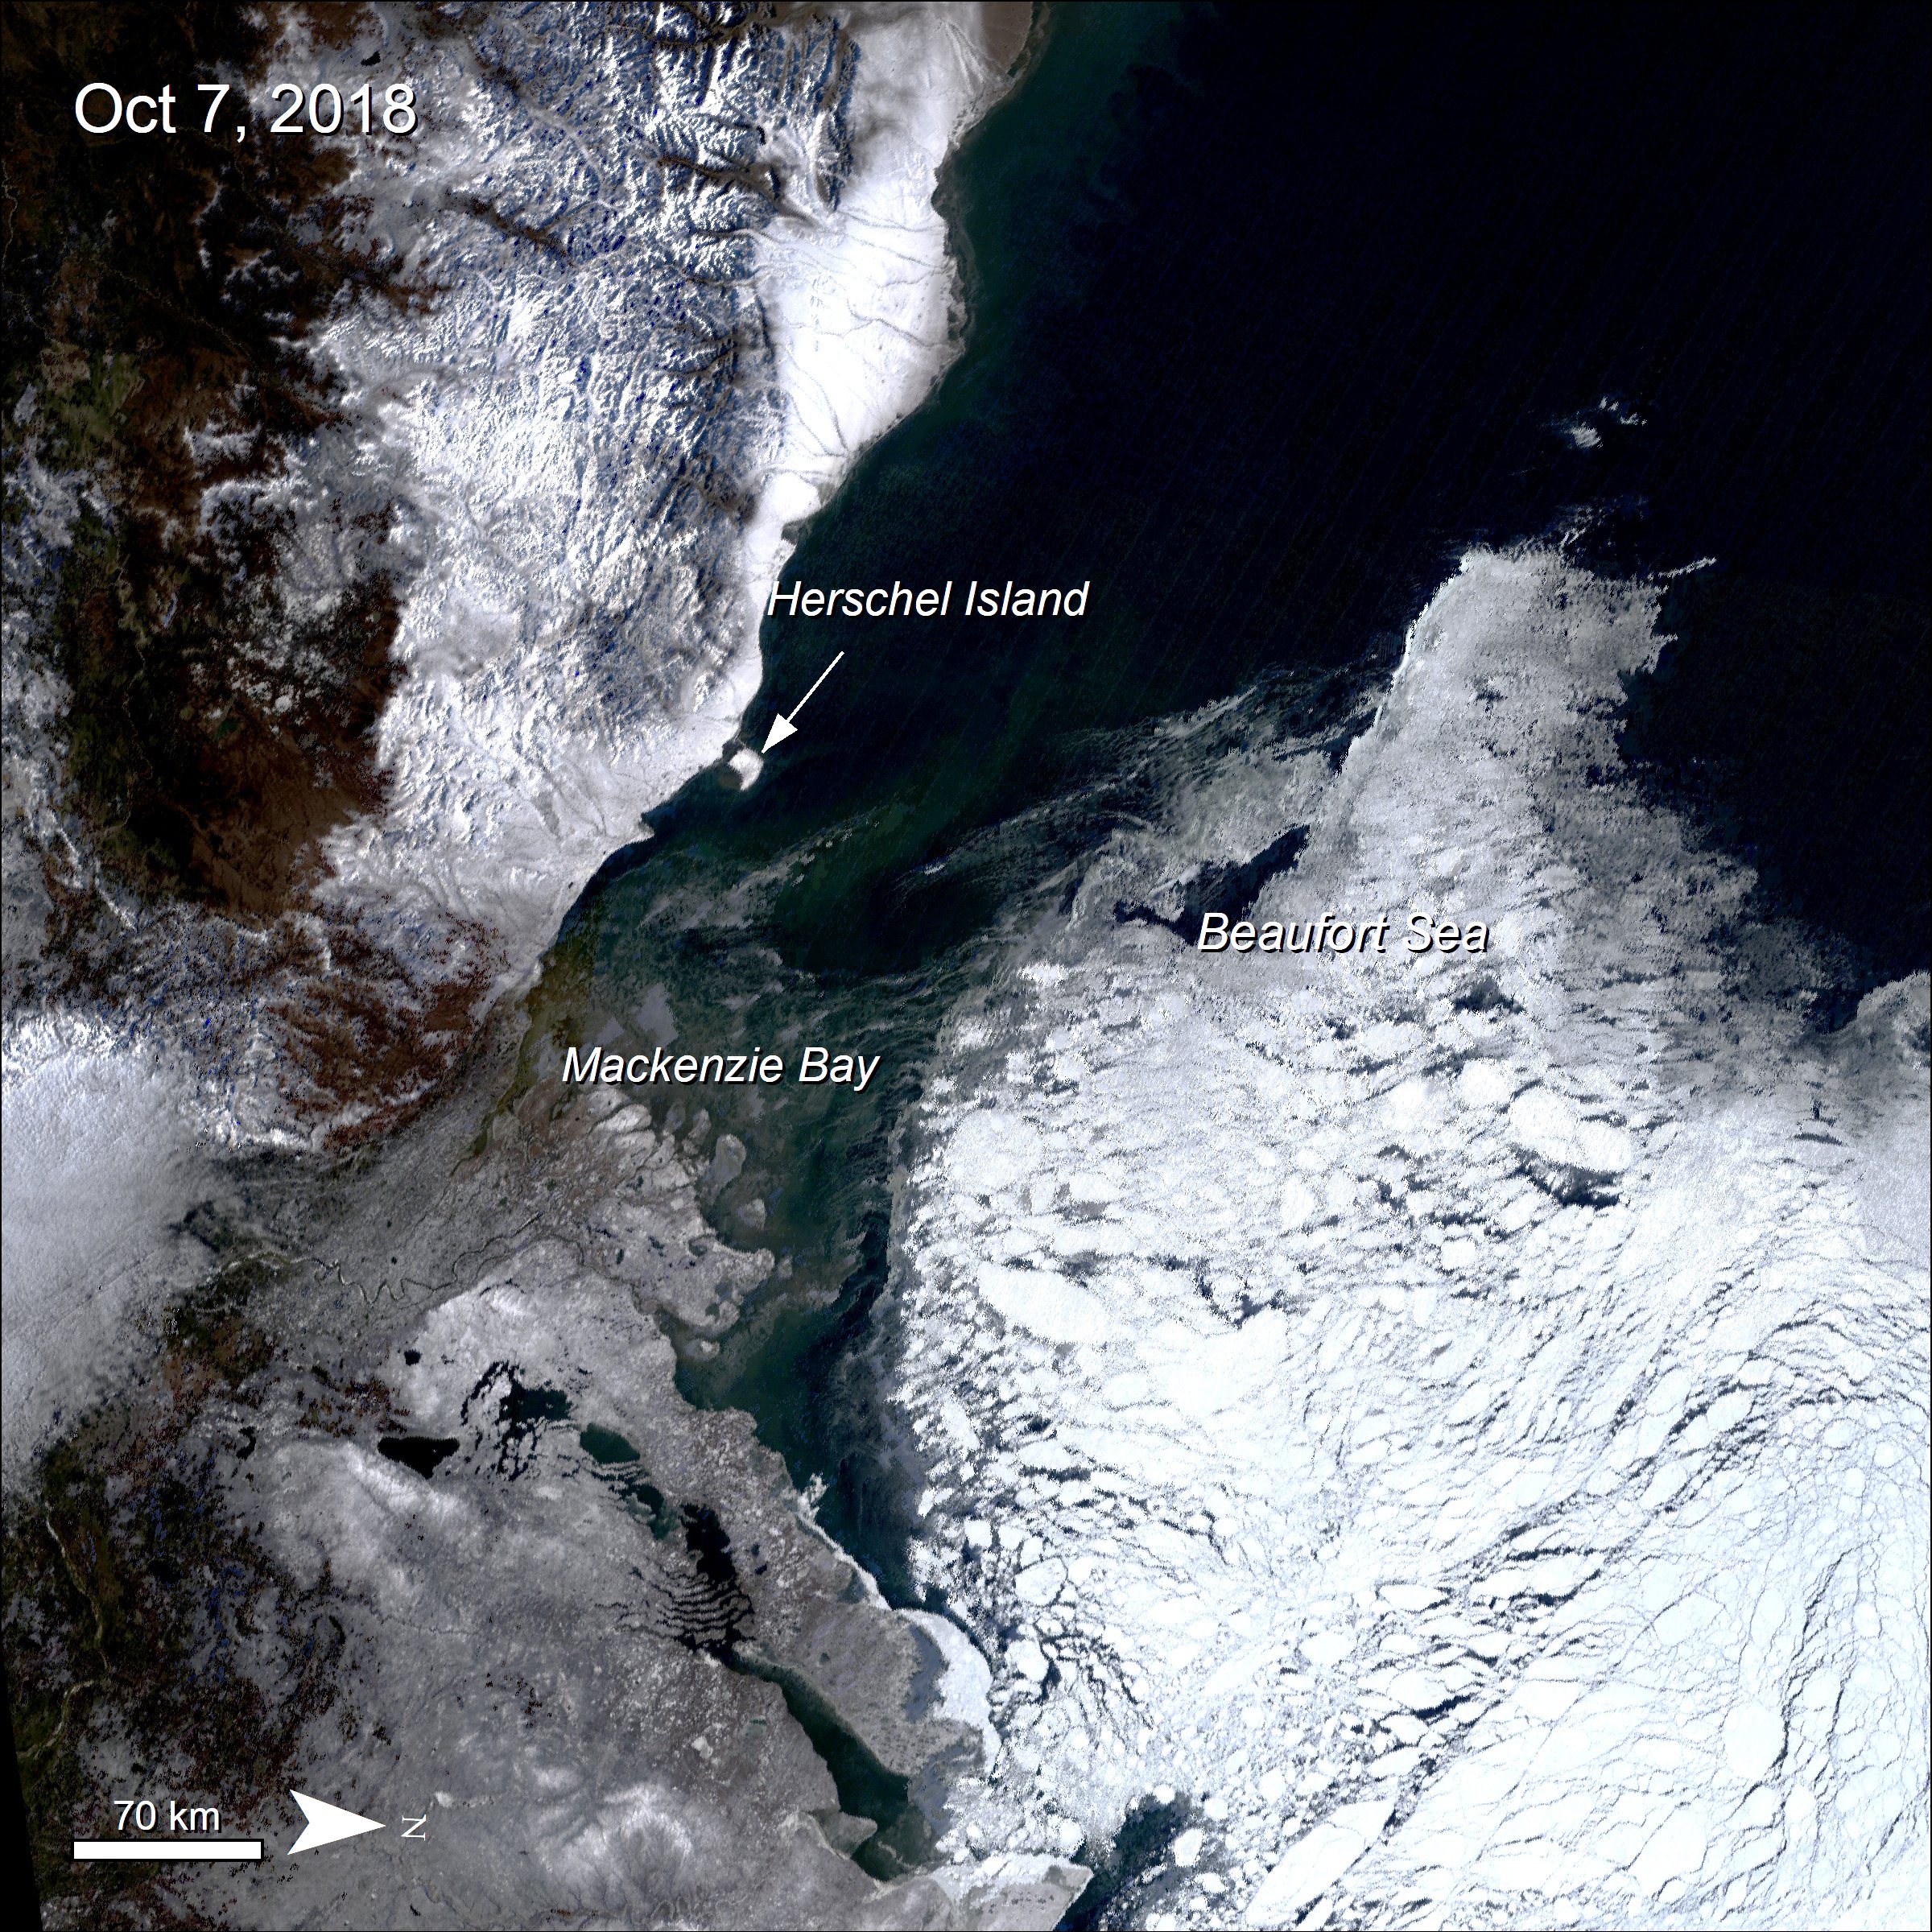 Terra MODIS true color Surface Reflectance data over the Beaufort Sea, Canada showing sea ice in white.